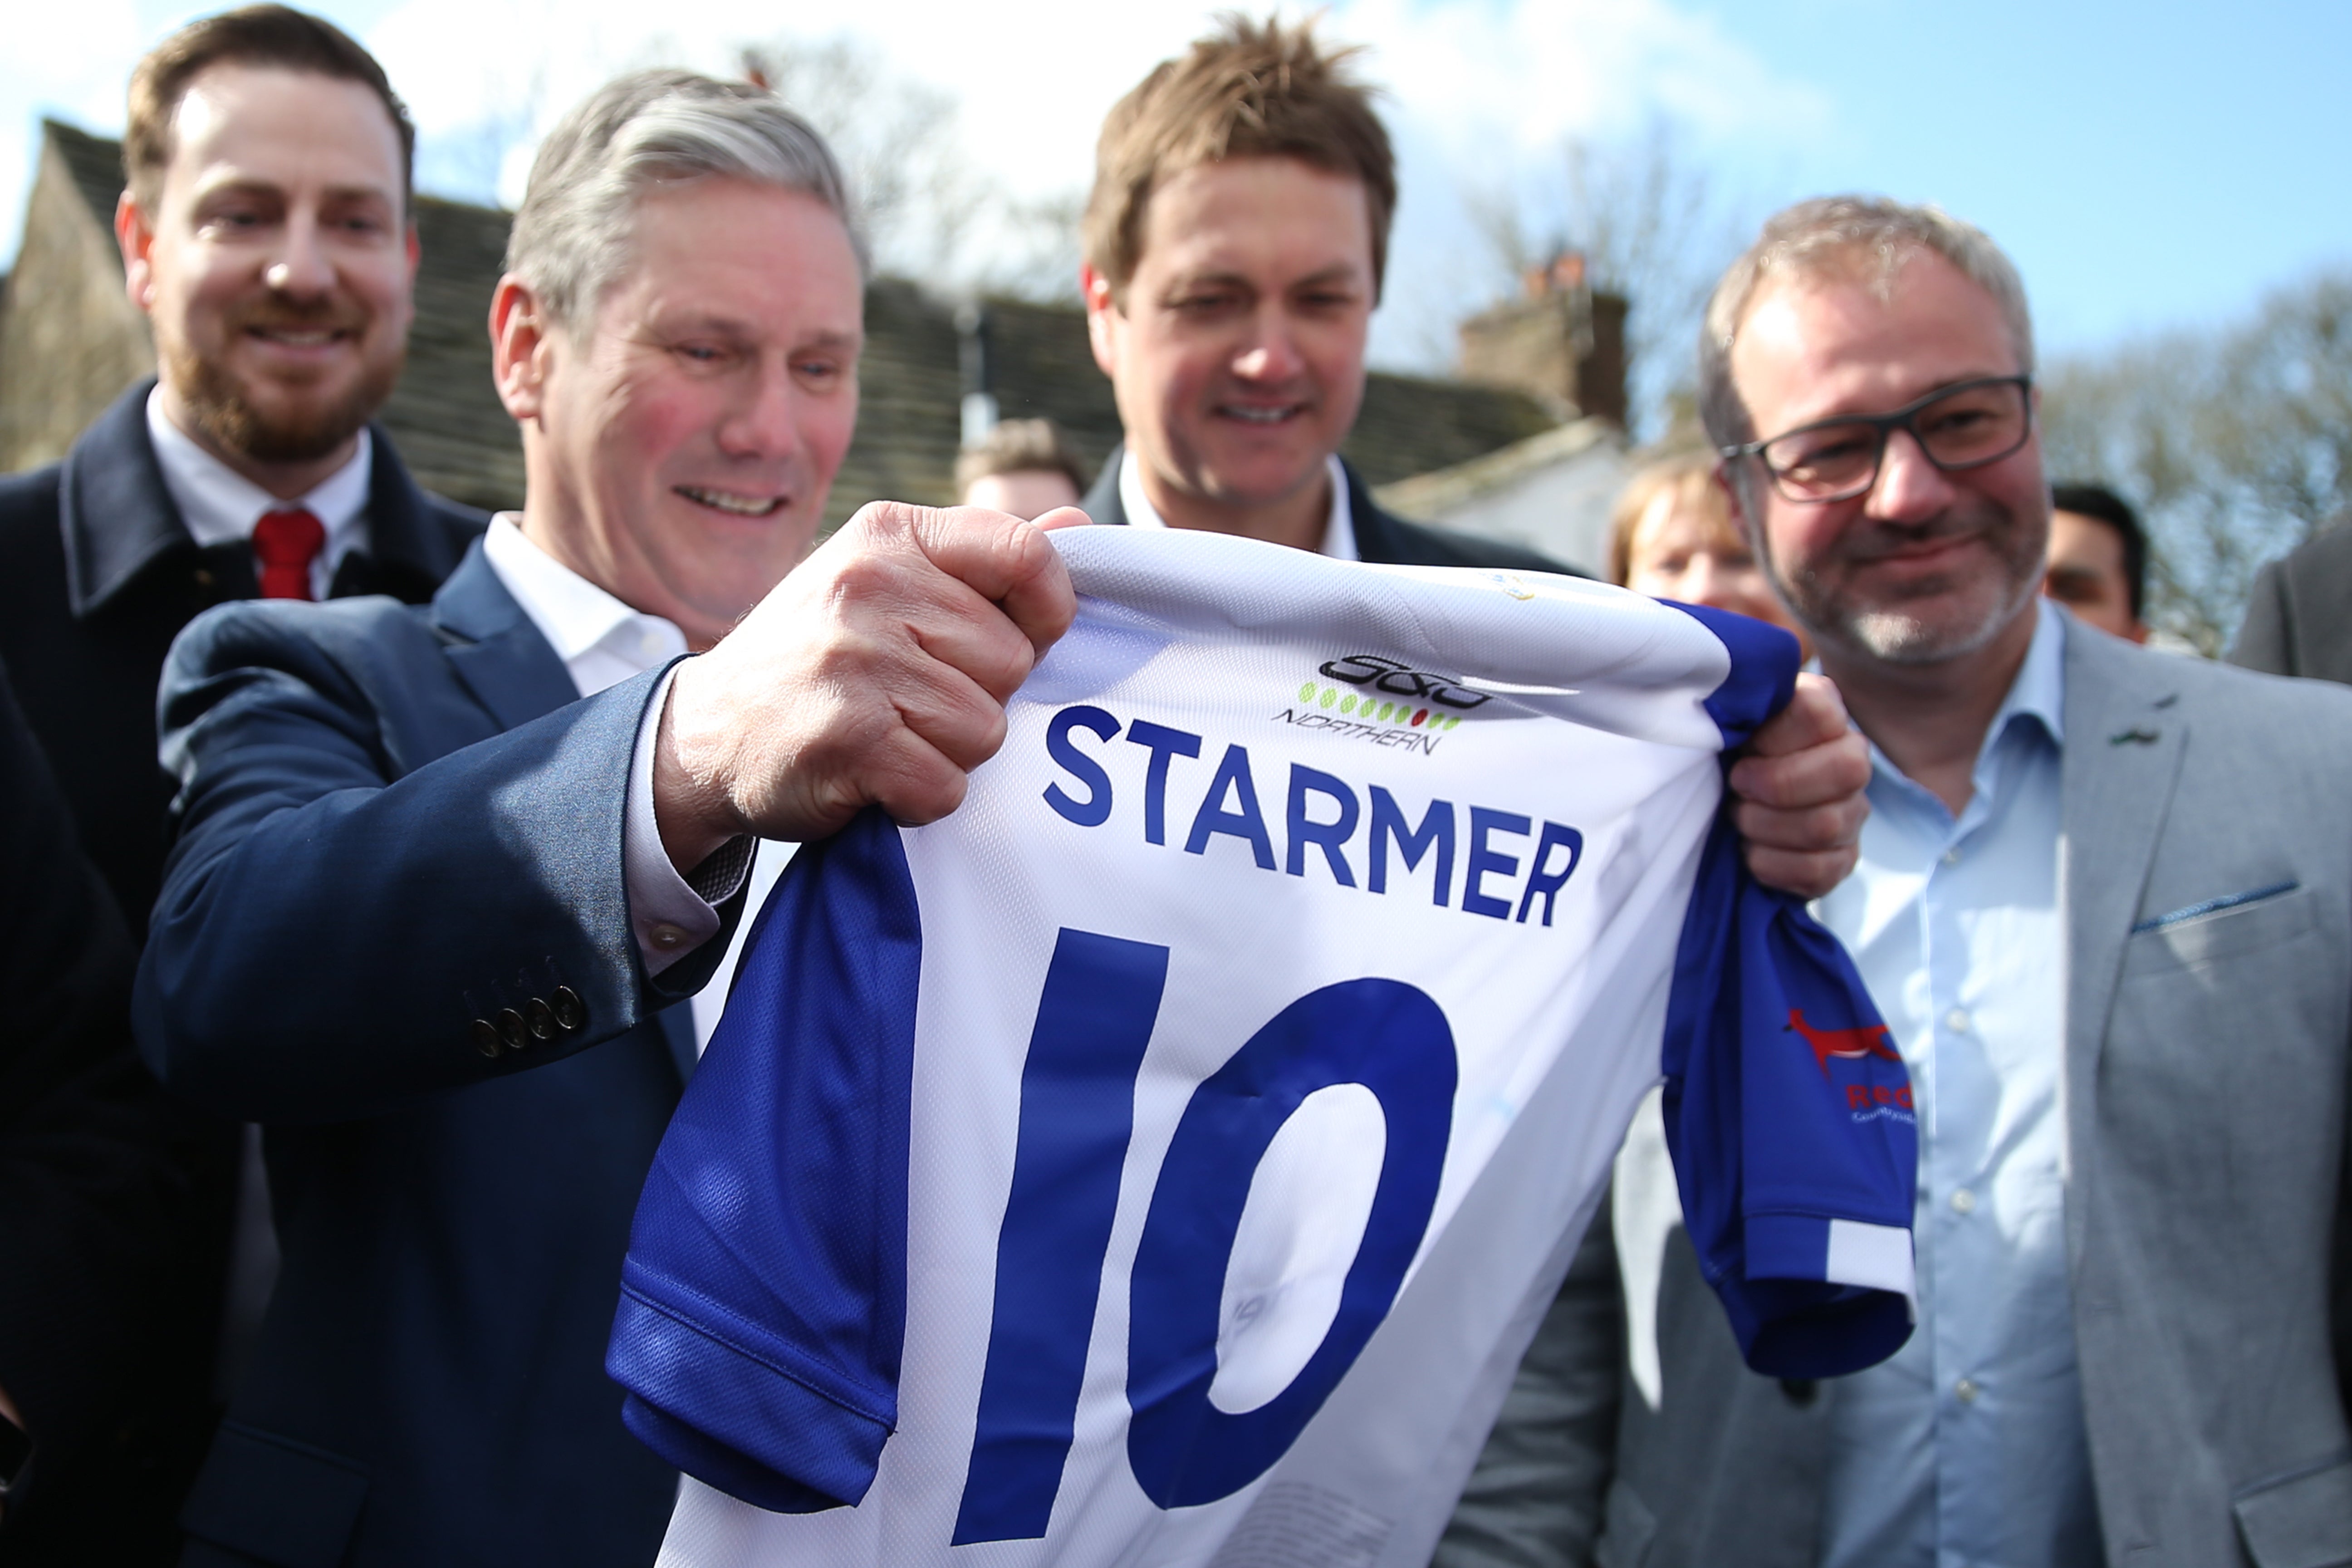 Critics claim Starmer does not want leftwingers on his team